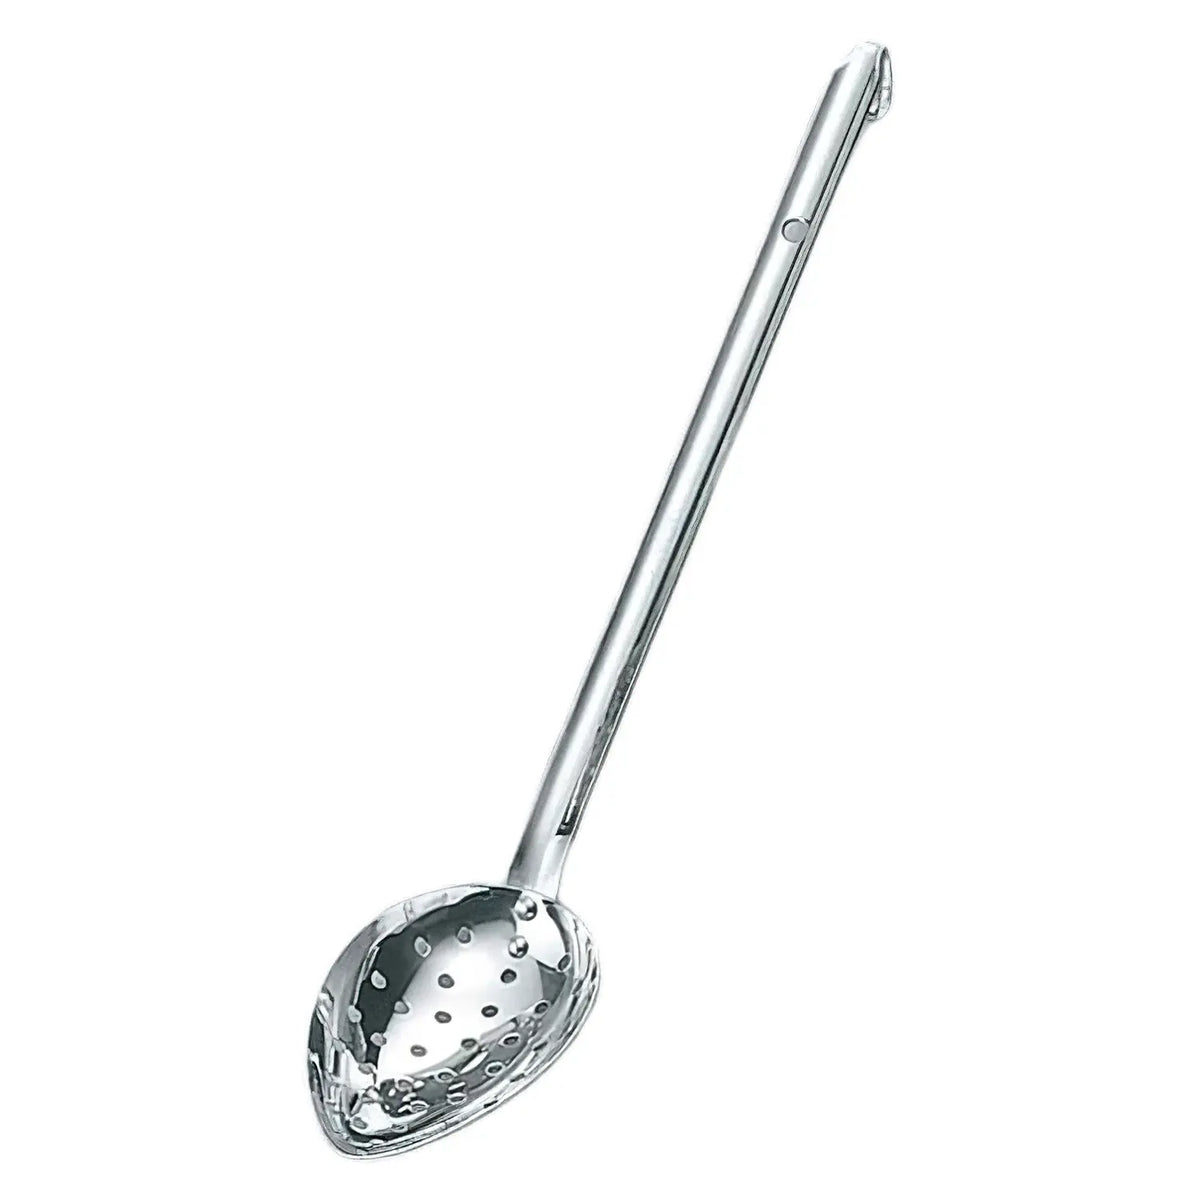 YUKIWA Stainless Steel Vertical-Scooping Ladle with Holes